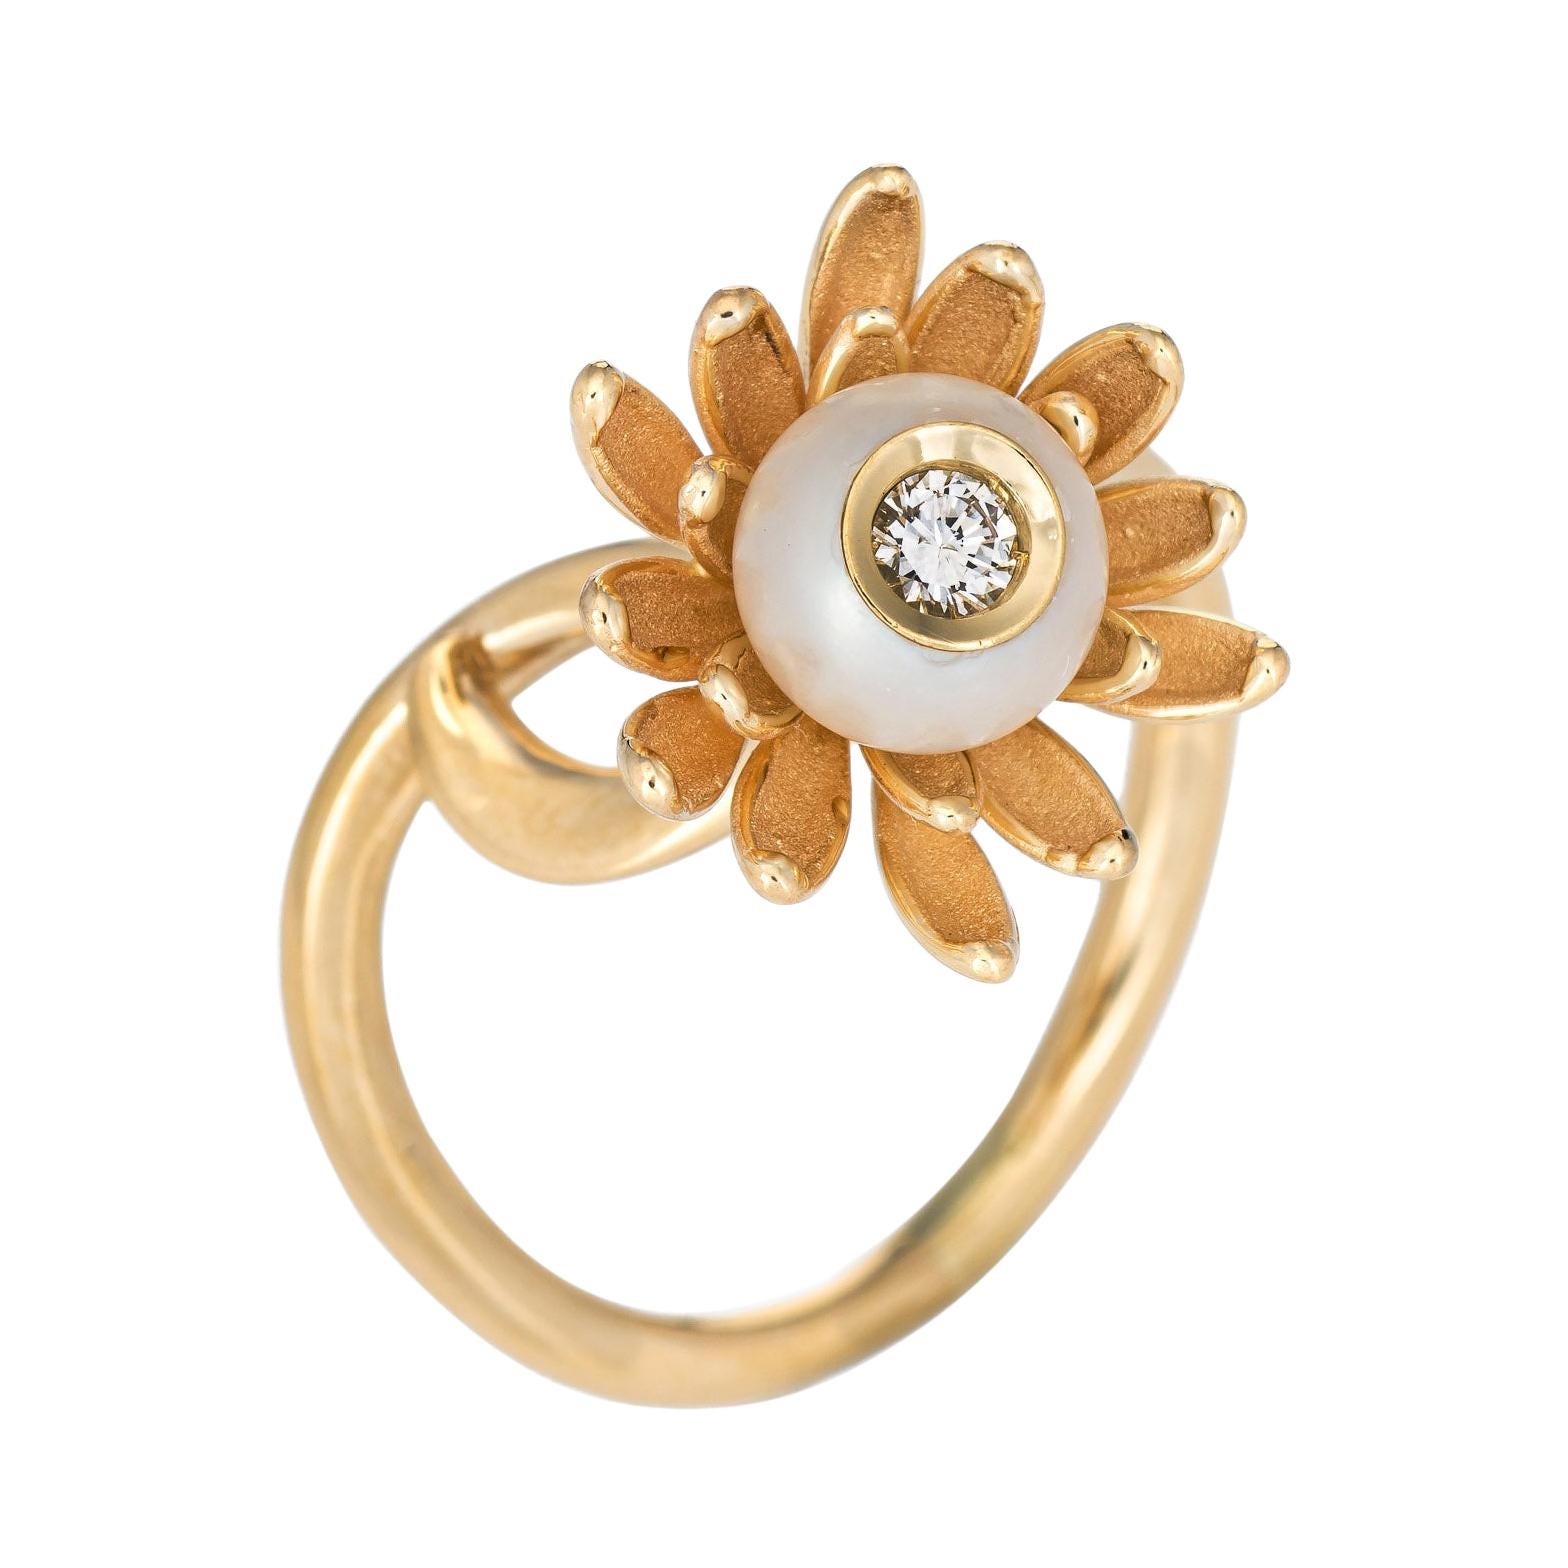 Diamond in Pearl Flower Ring Vintage 14k Yellow Gold Estate Fine Jewelry For Sale